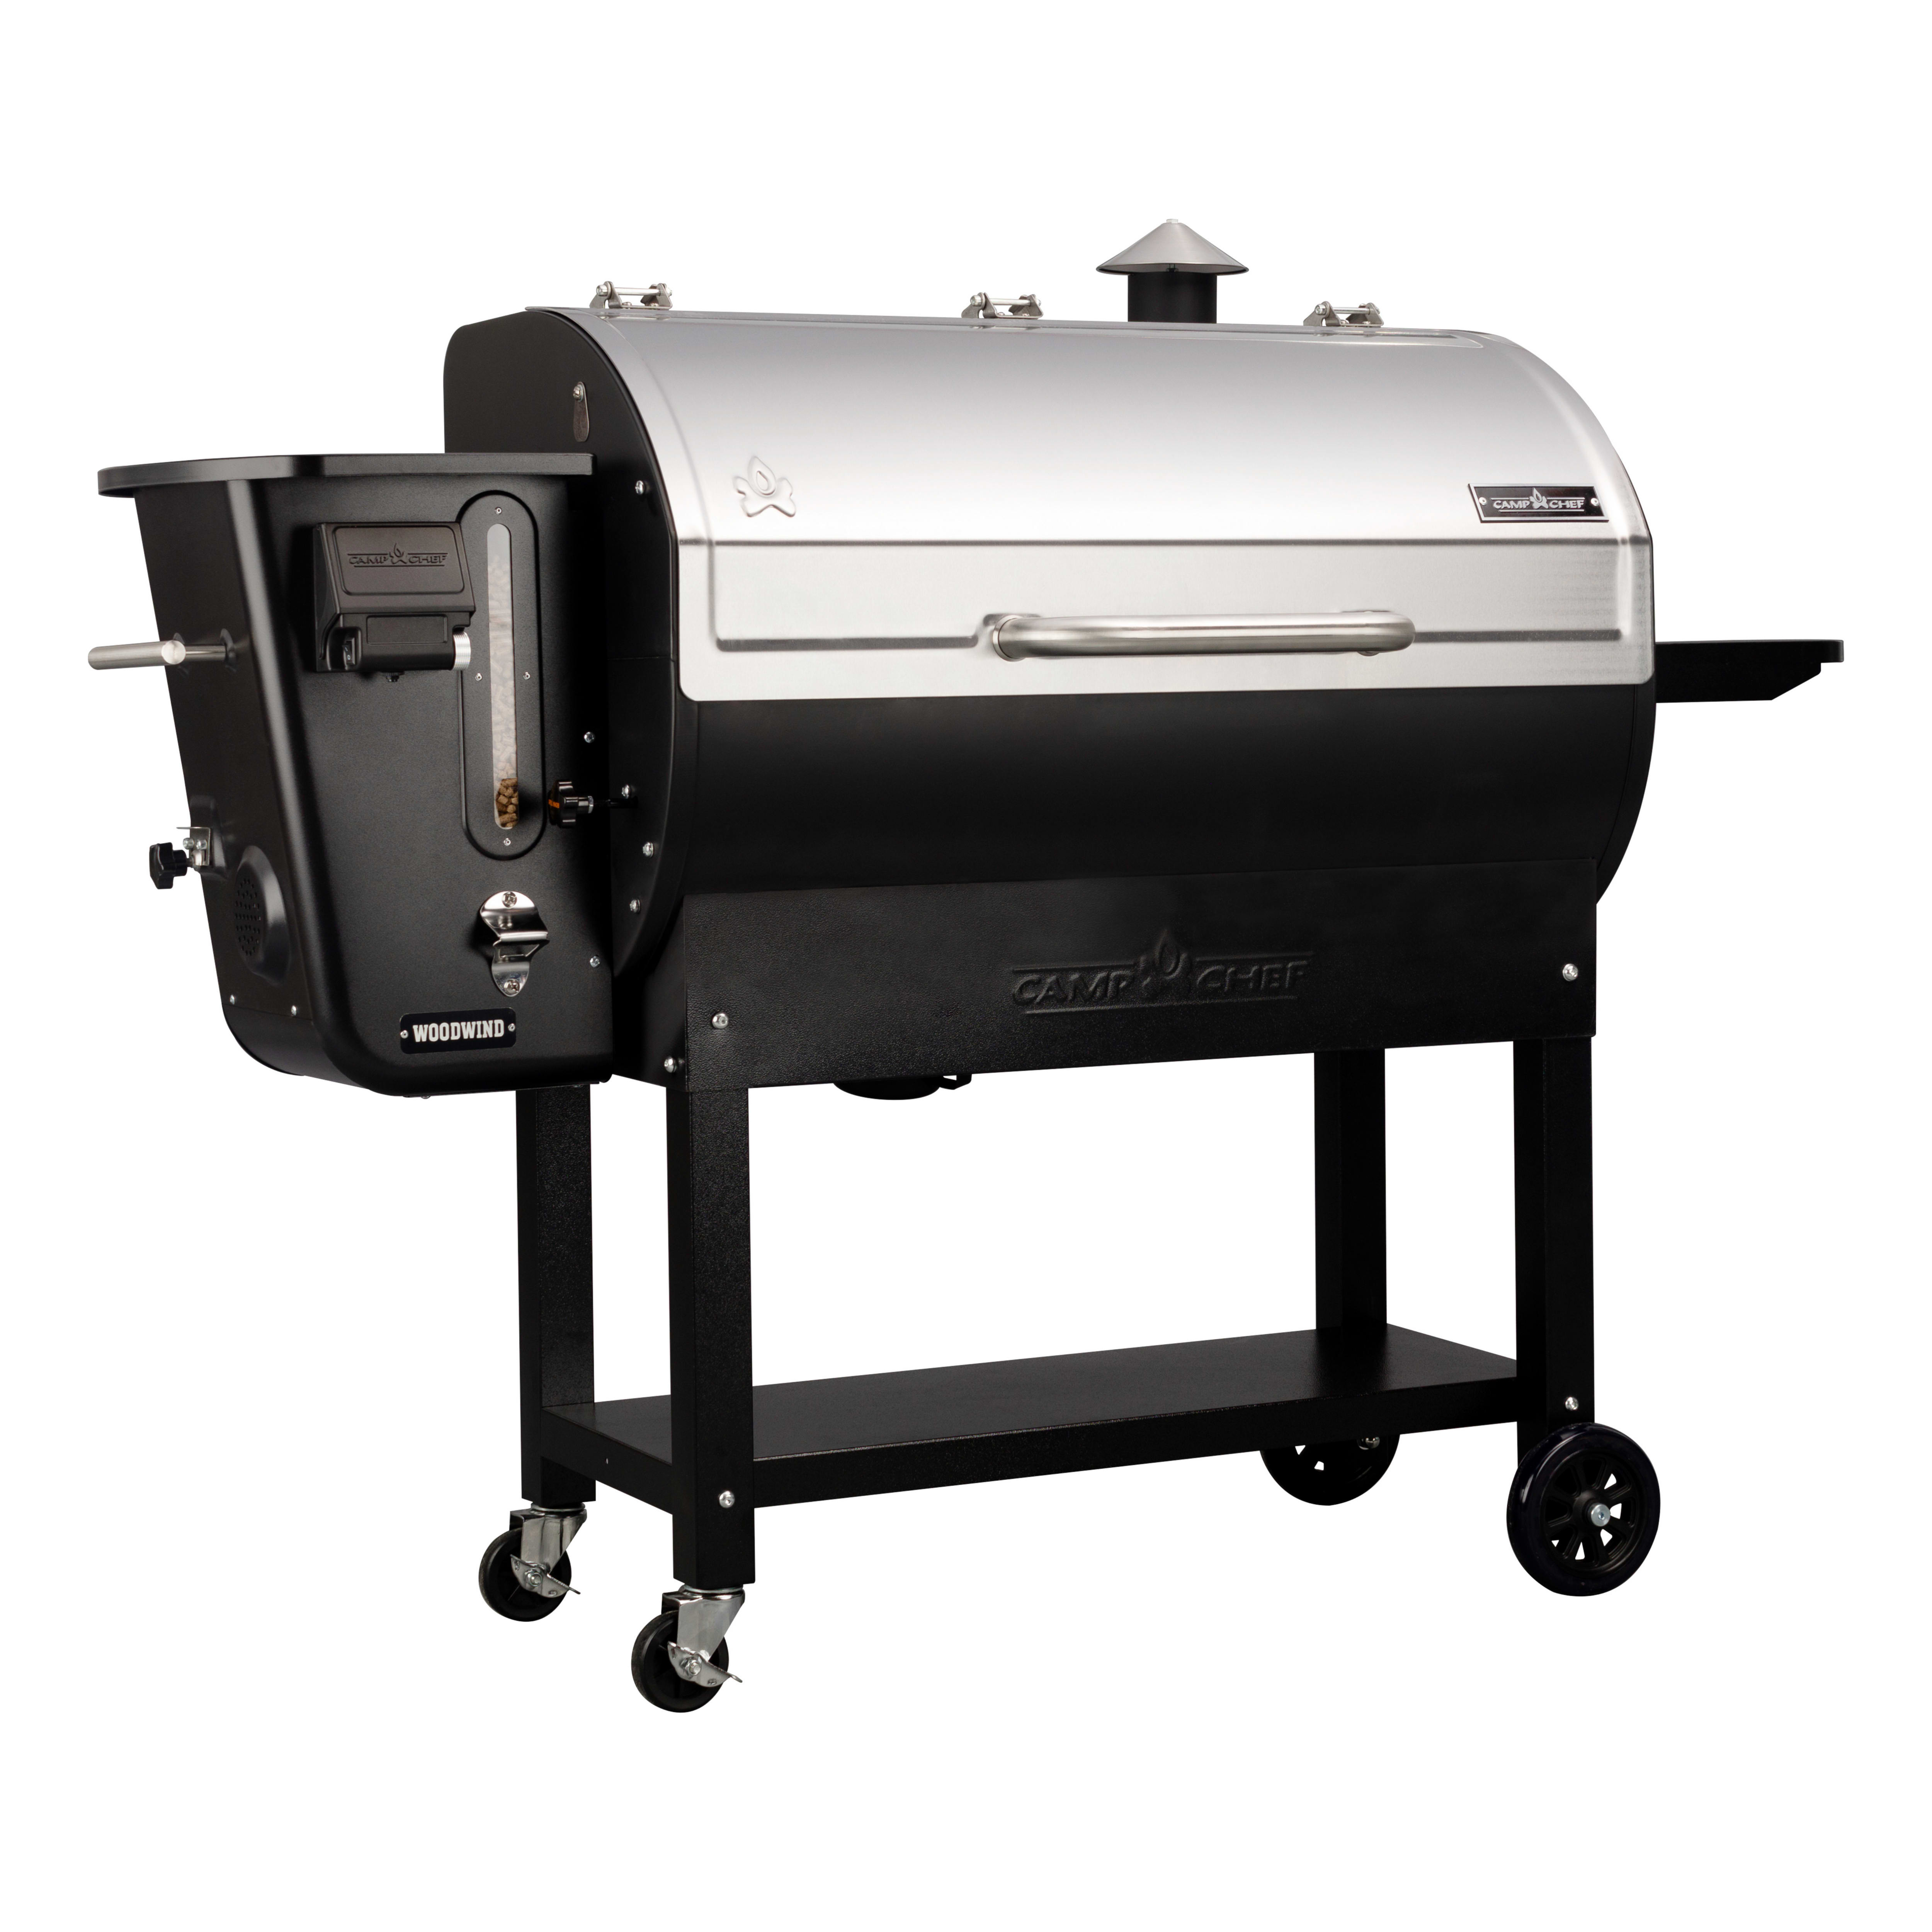 Camp Chef® Woodwind 36" Pellet Grill